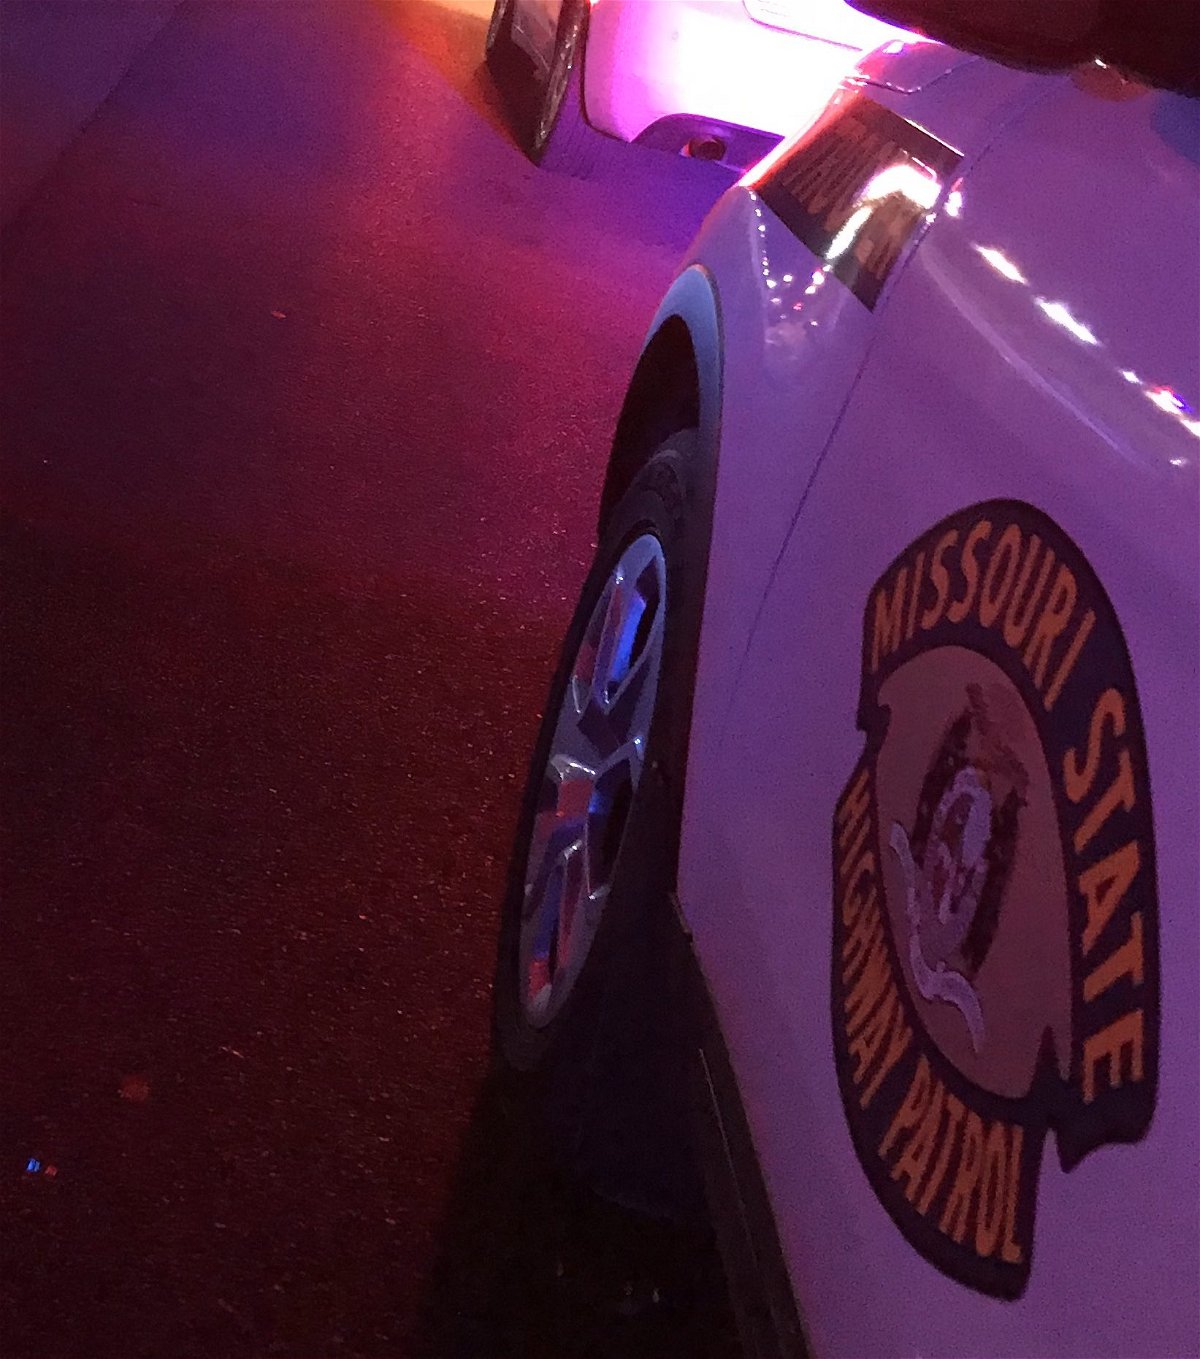 Missouri State Highway Patrol Vehicle parked with its lights on.